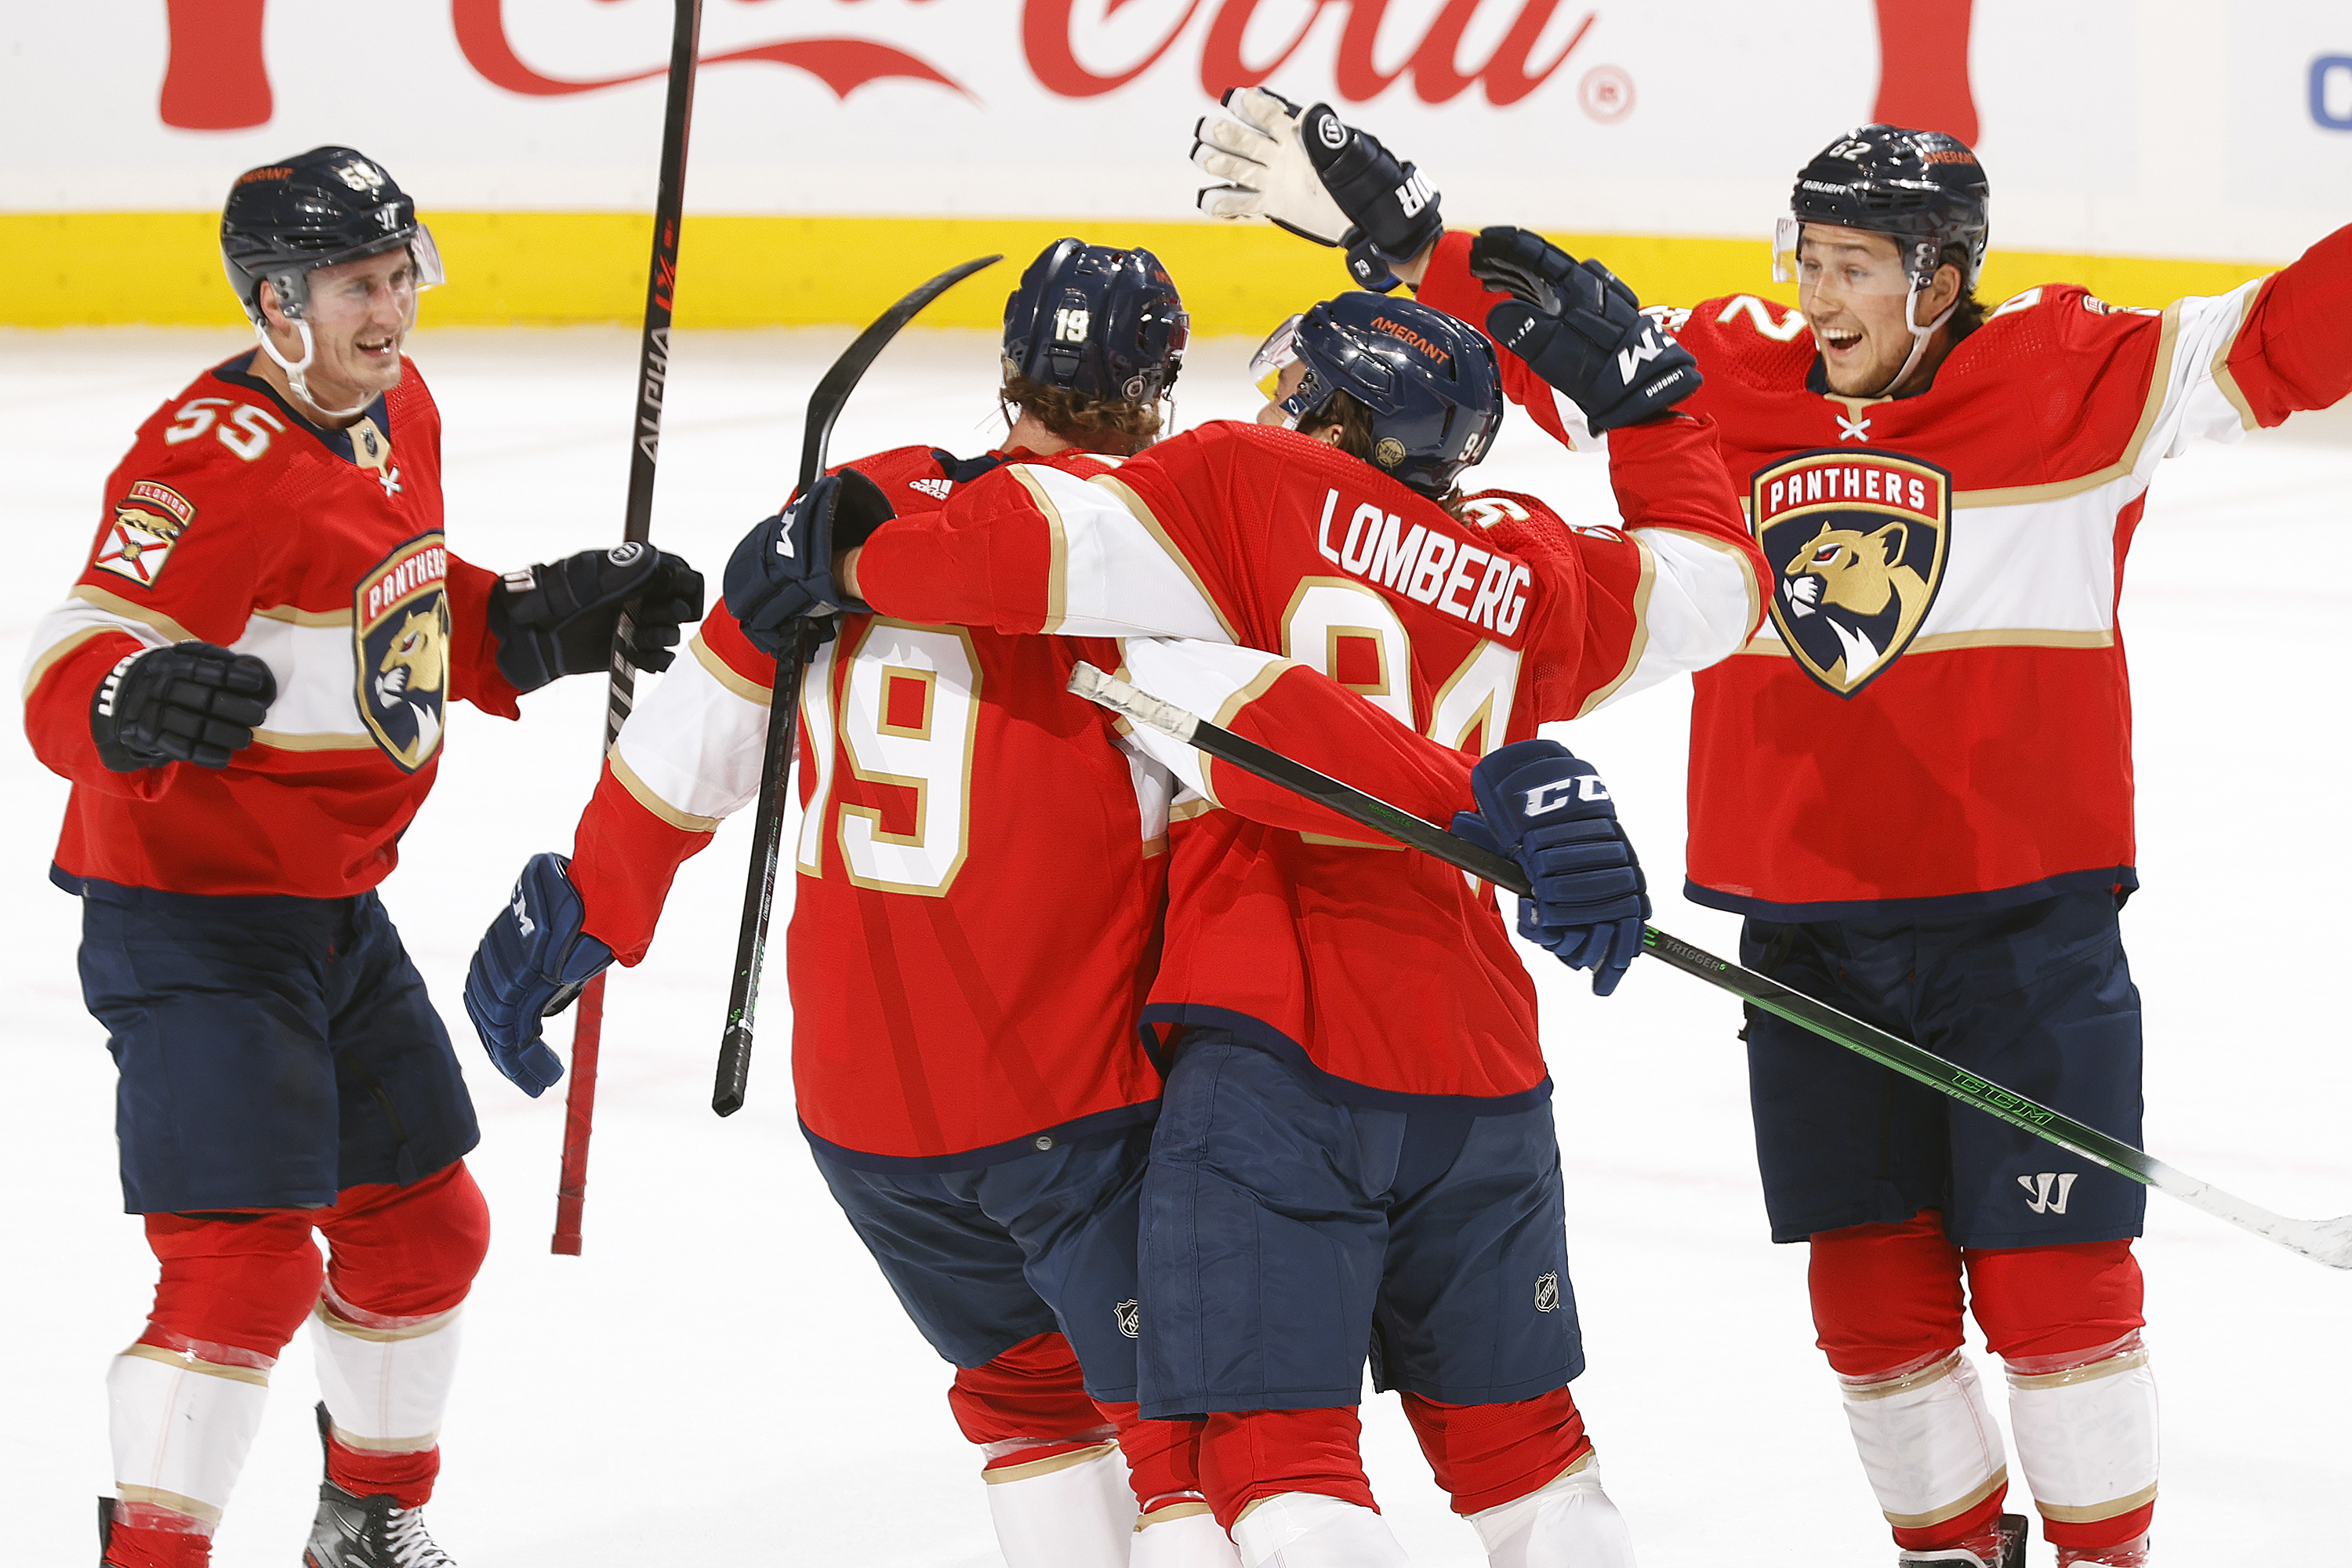 Panthers beat Sabres 5-3 to clinch playoff berth